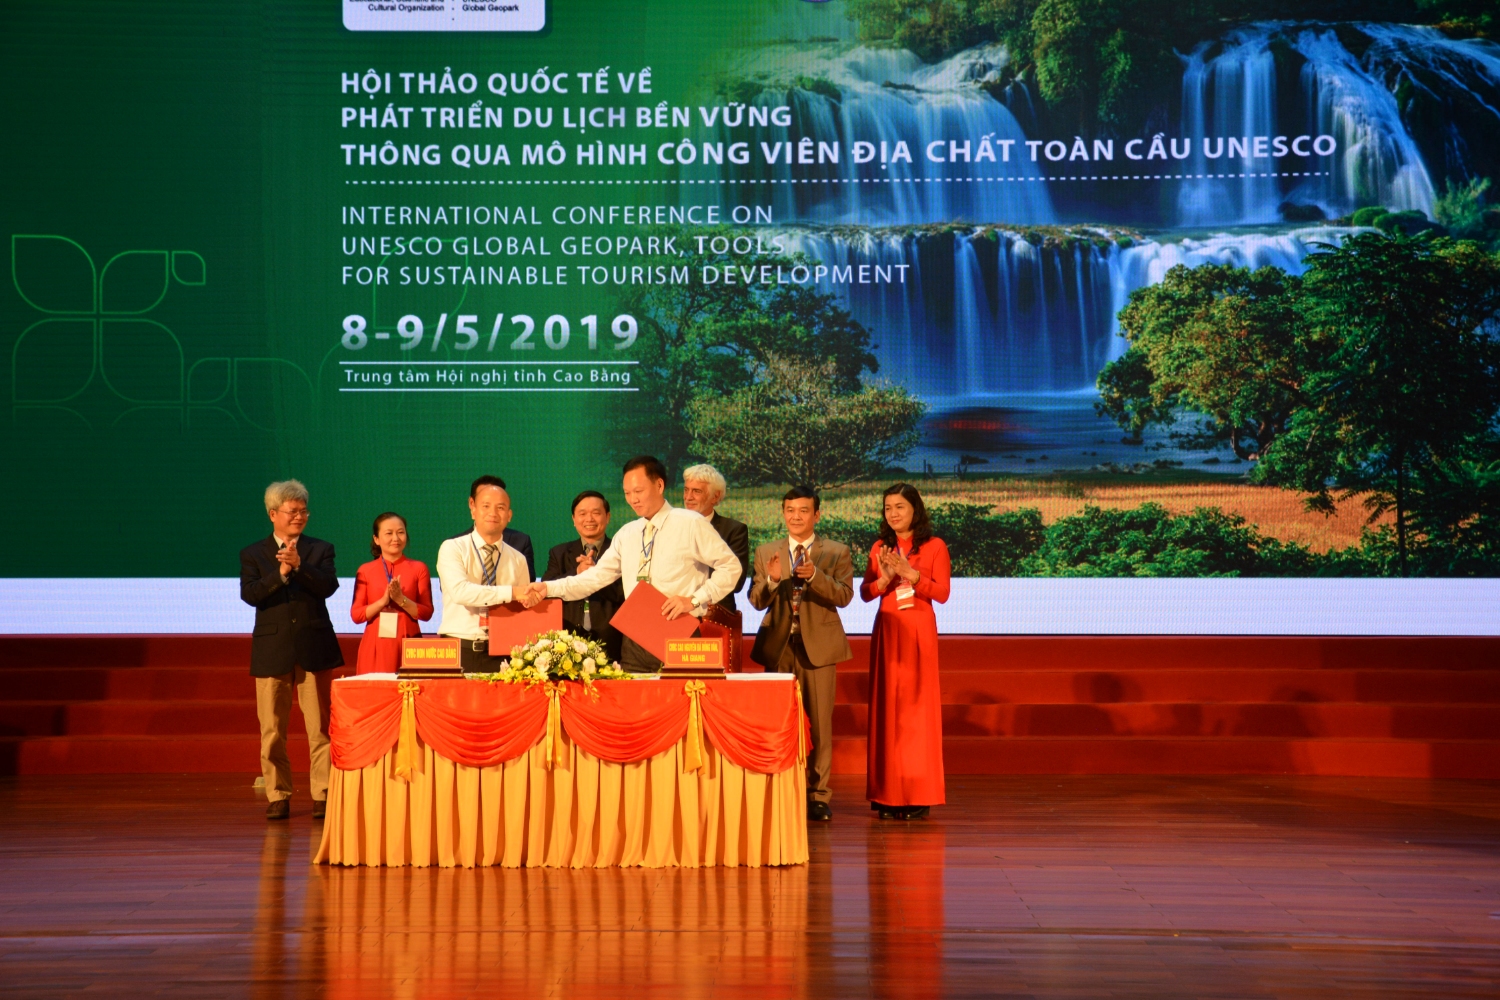 Mr. Trieu Dinh Le witnessed the cooperation signing ceremony between Non nuoc Cao Bang (Cao Bang) and Dong Van Karst plateau UGGps (Ha Giang).